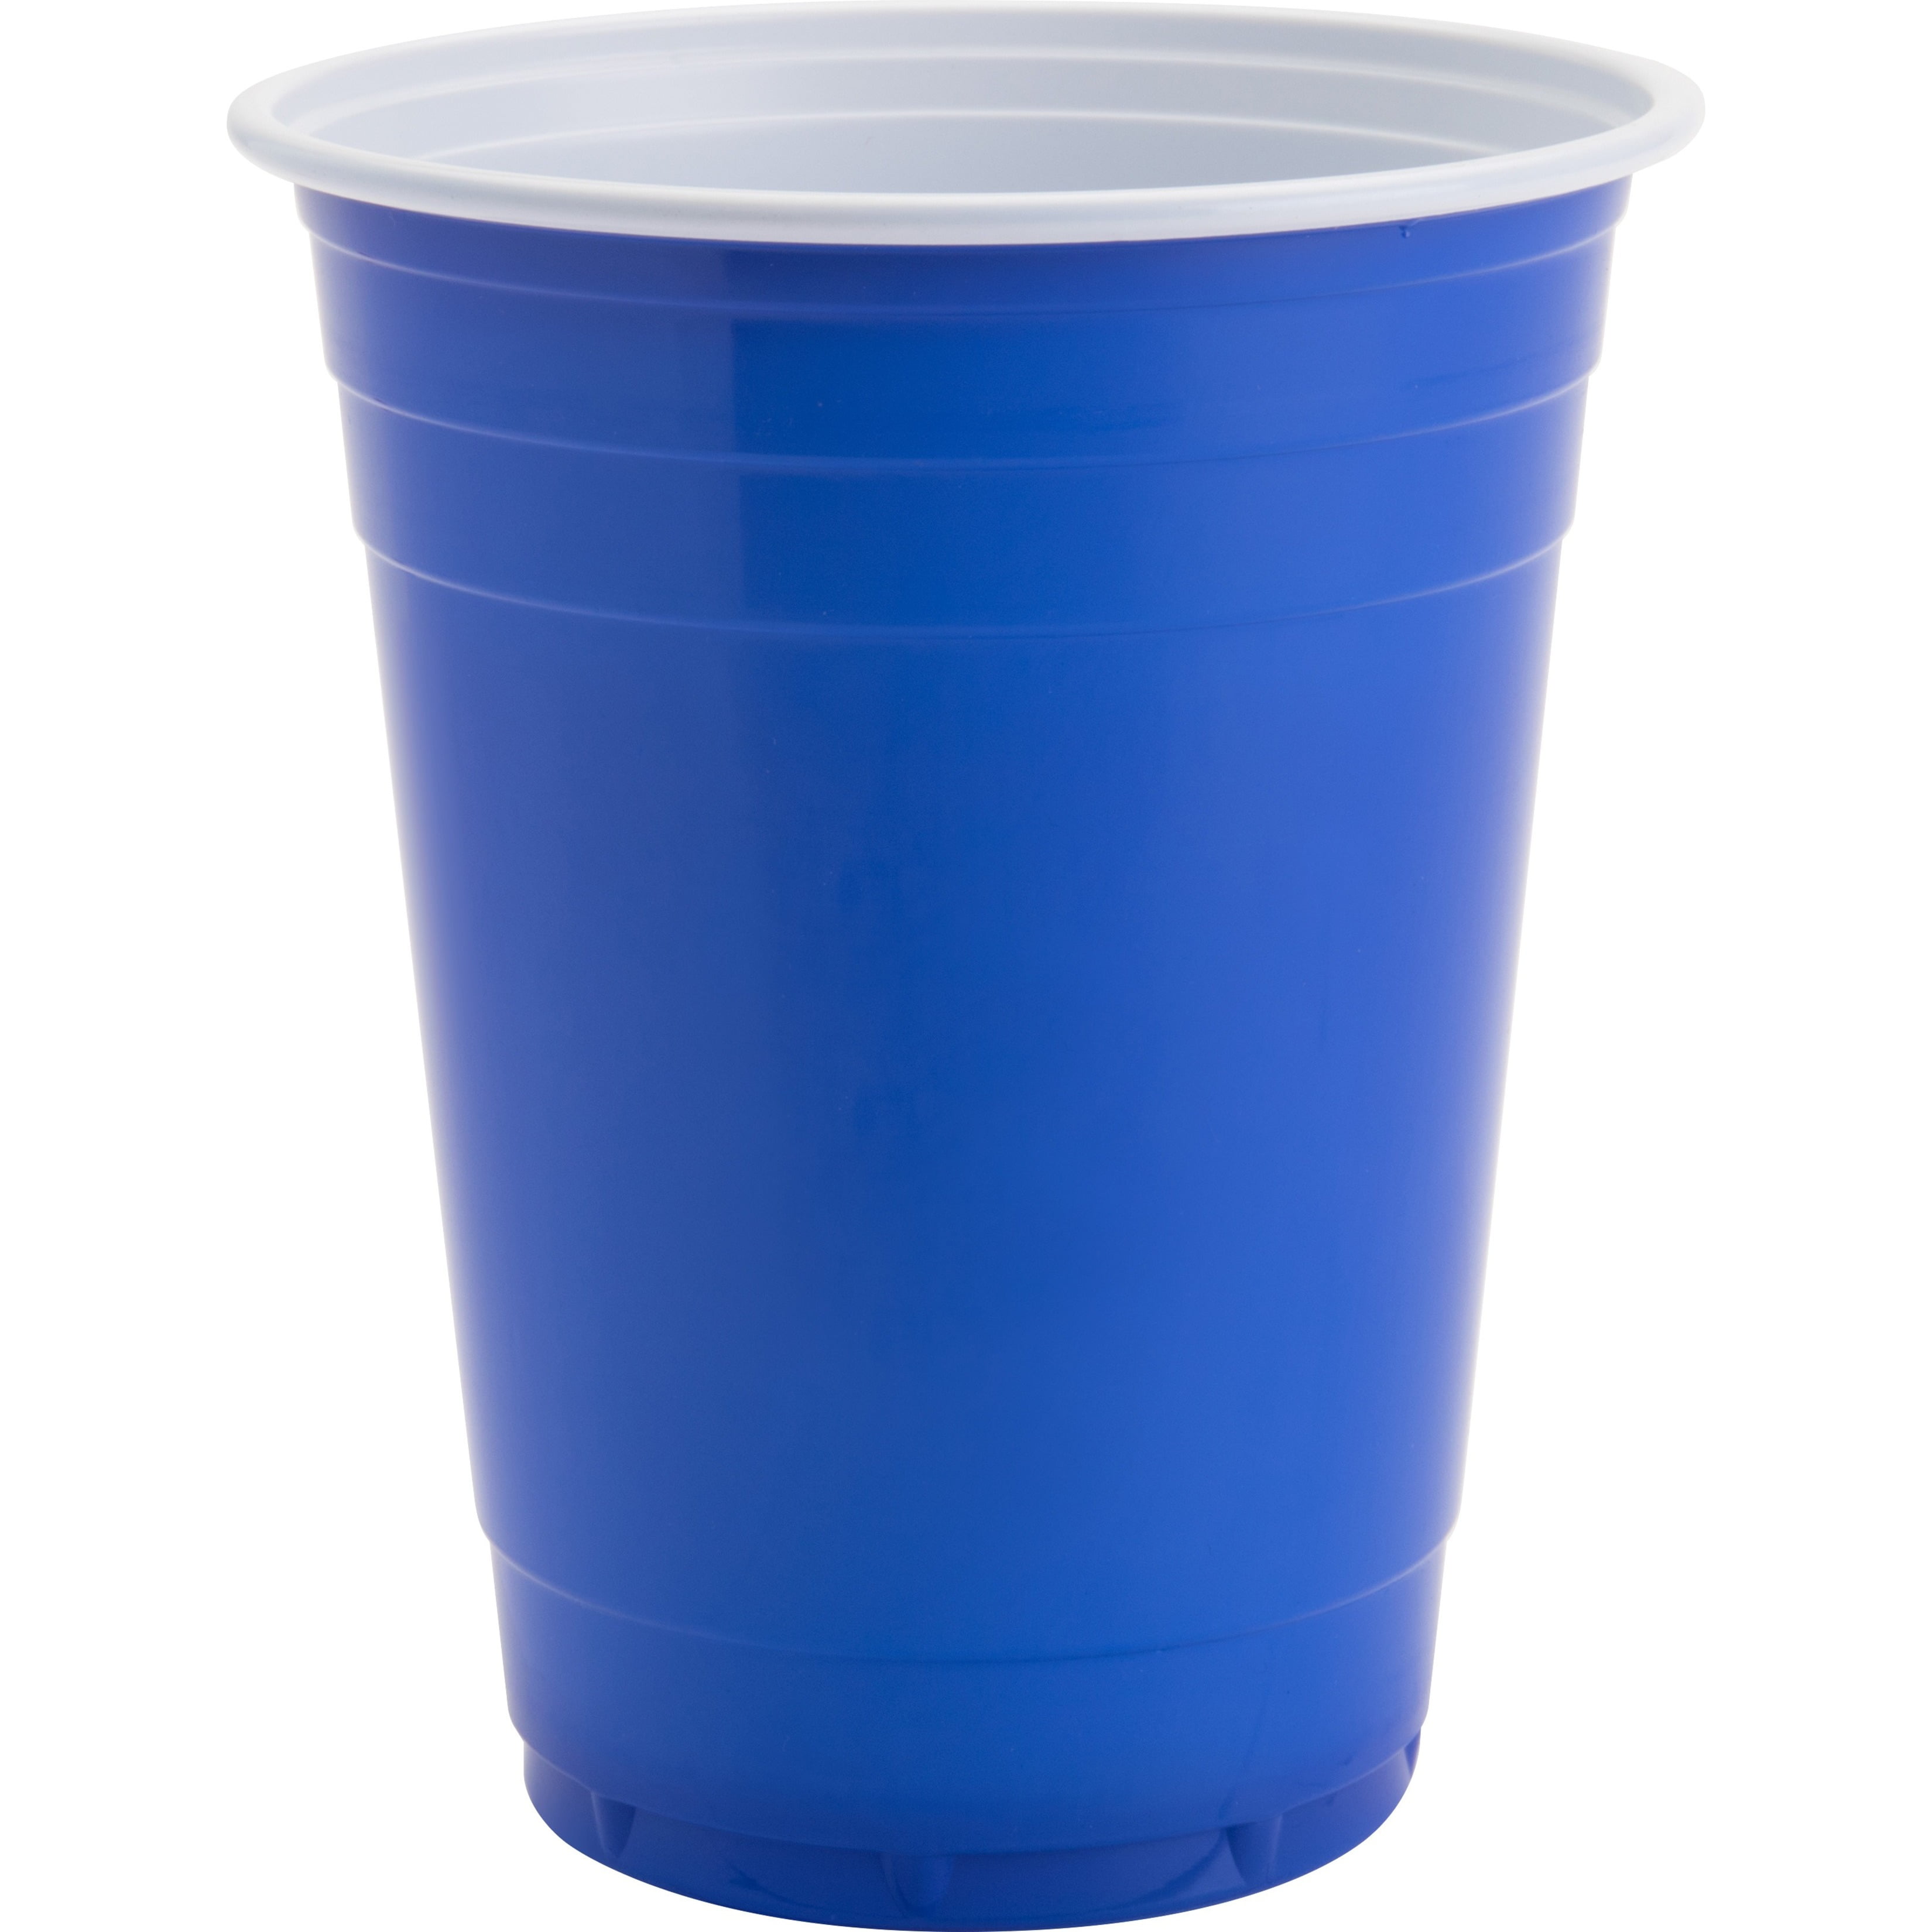 Choice 16 oz. Yellow Plastic Cup - 50/Pack